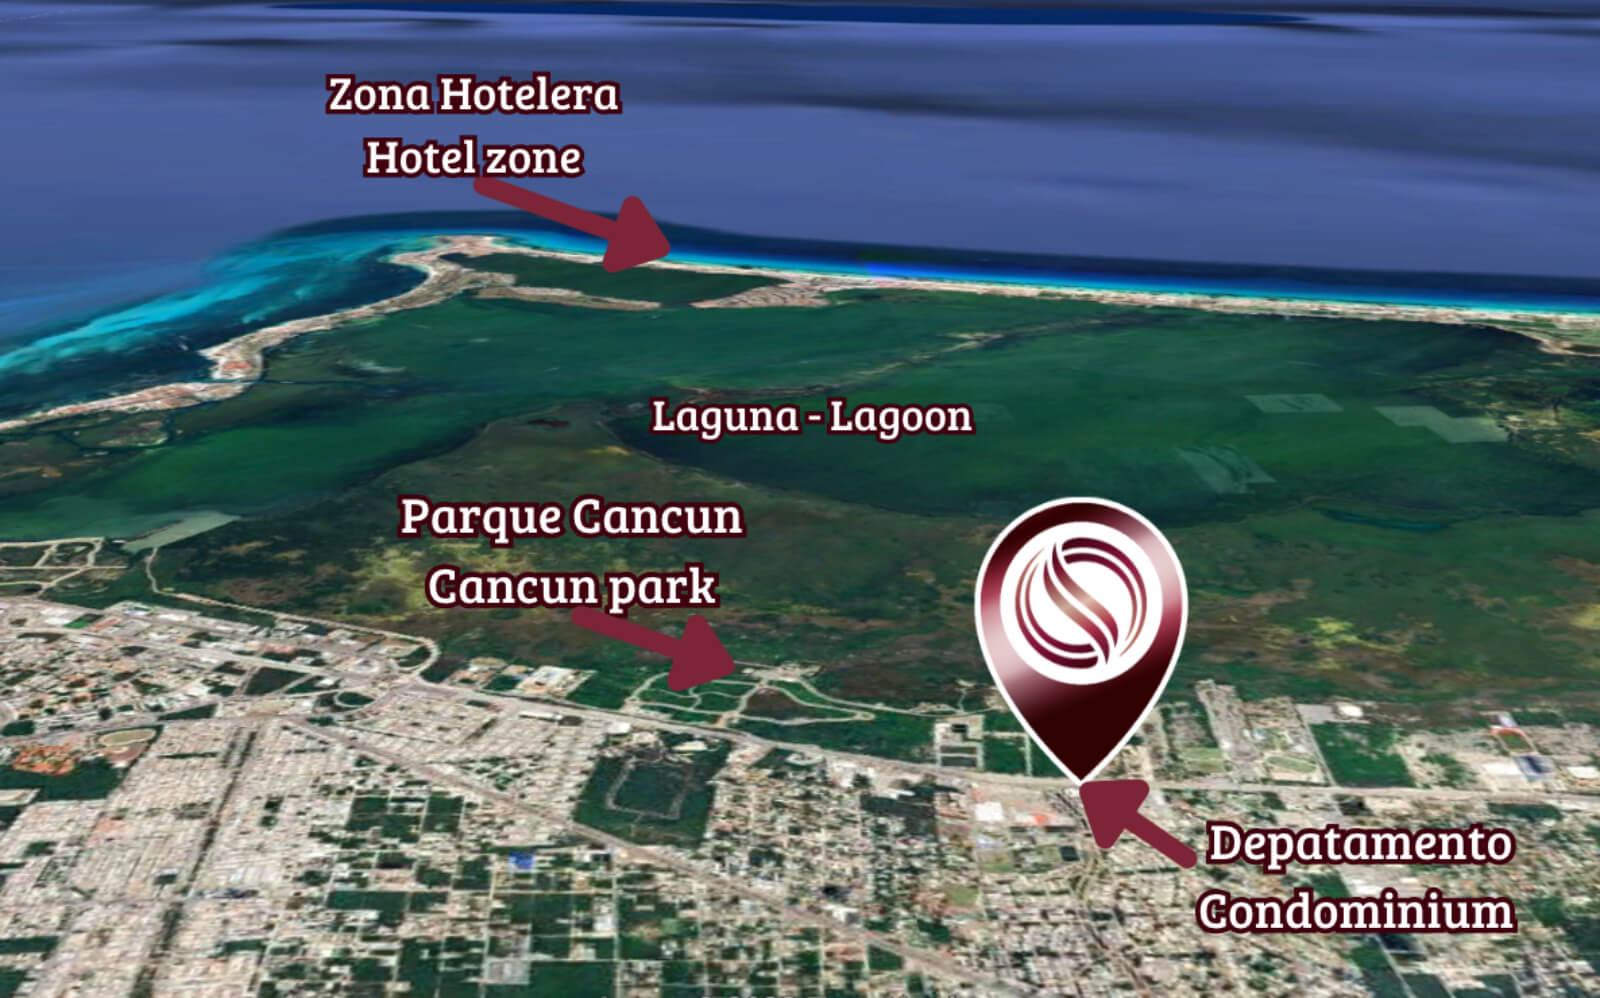 Spacious luxury apartment in the center of Cancun, with amenities: spa, pool, beauty salon, childrens club.